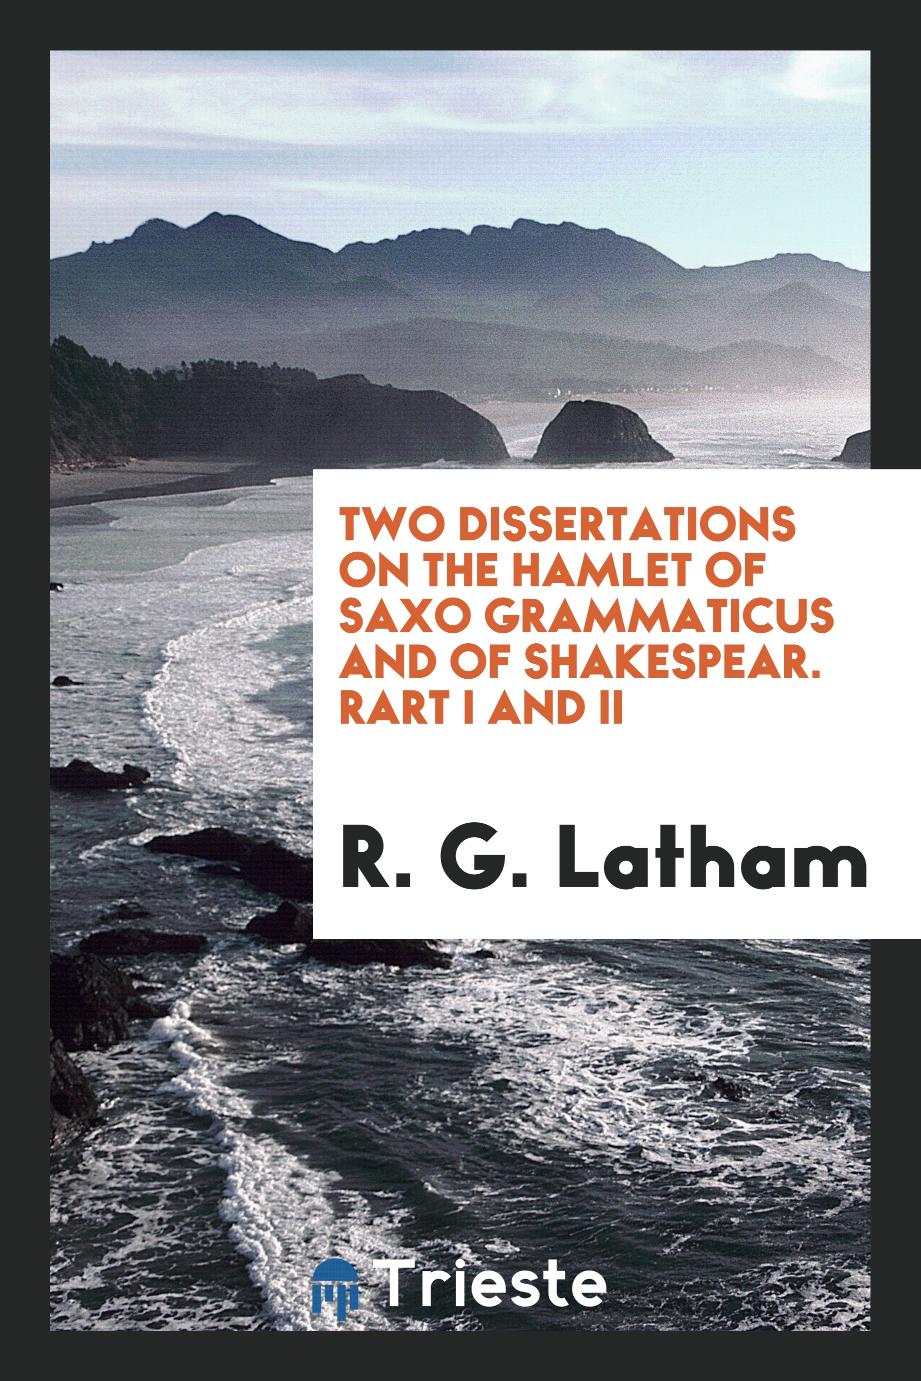 Two Dissertations on the Hamlet of Saxo Grammaticus and of Shakespear. Rart I and II